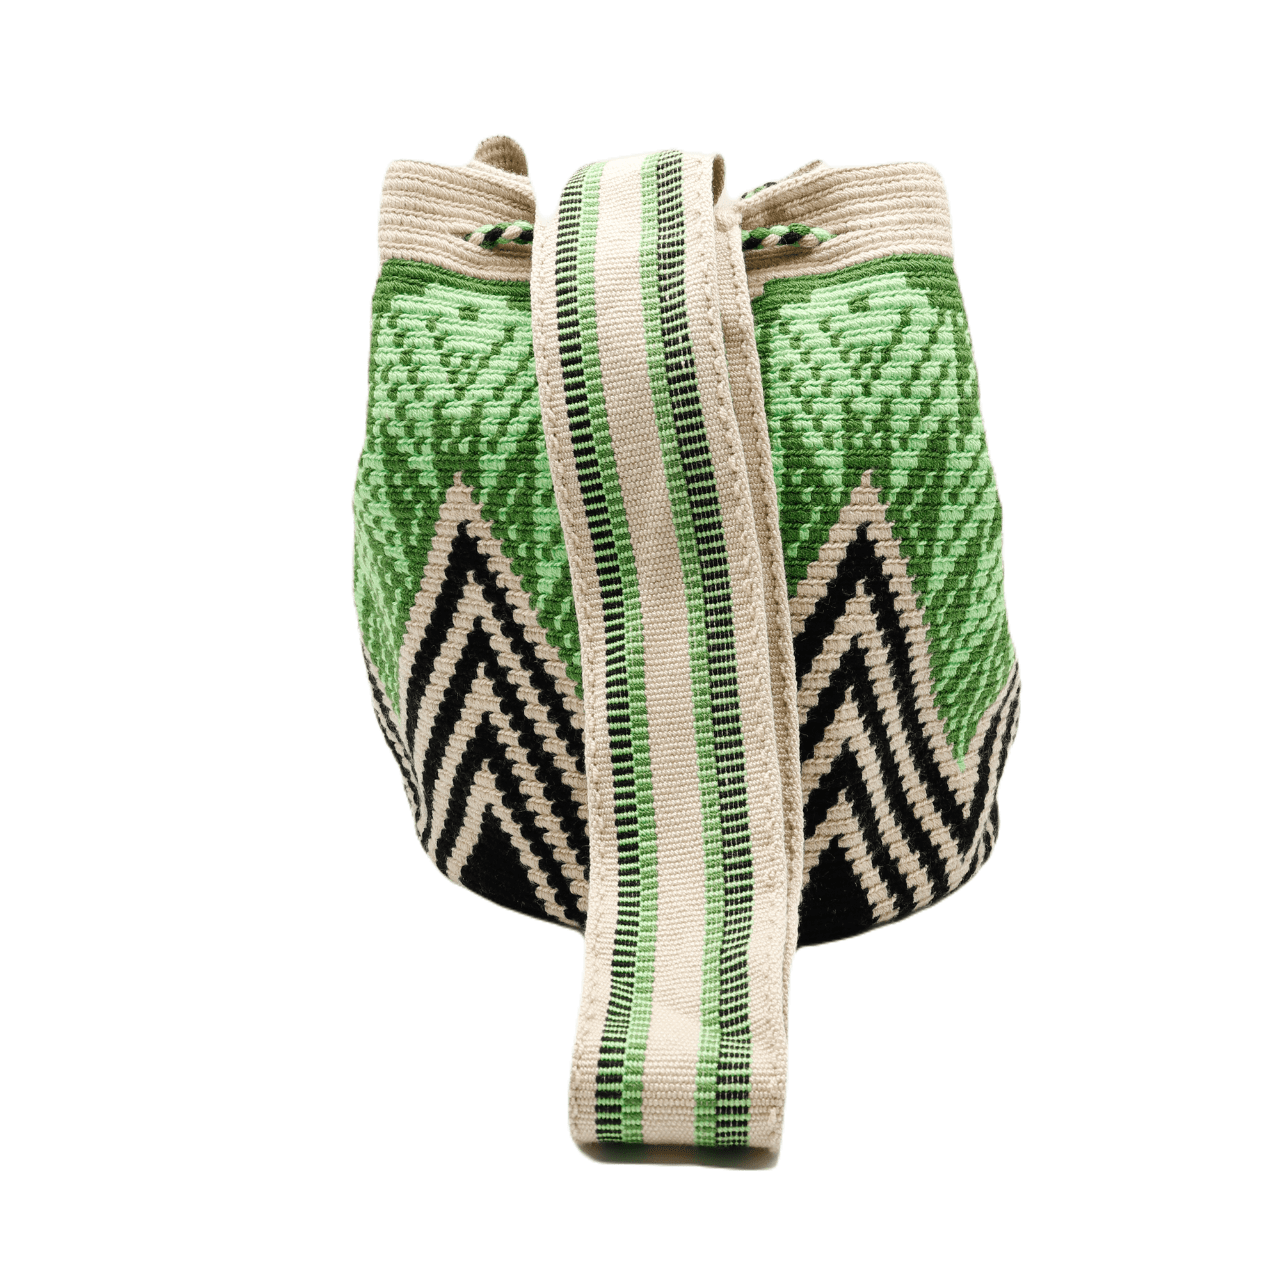 Alex Wayuu Bag in stunning green, beige, and black tones, handcrafted in Colombia, showcasing an exceptional and one-of-a-kind design.